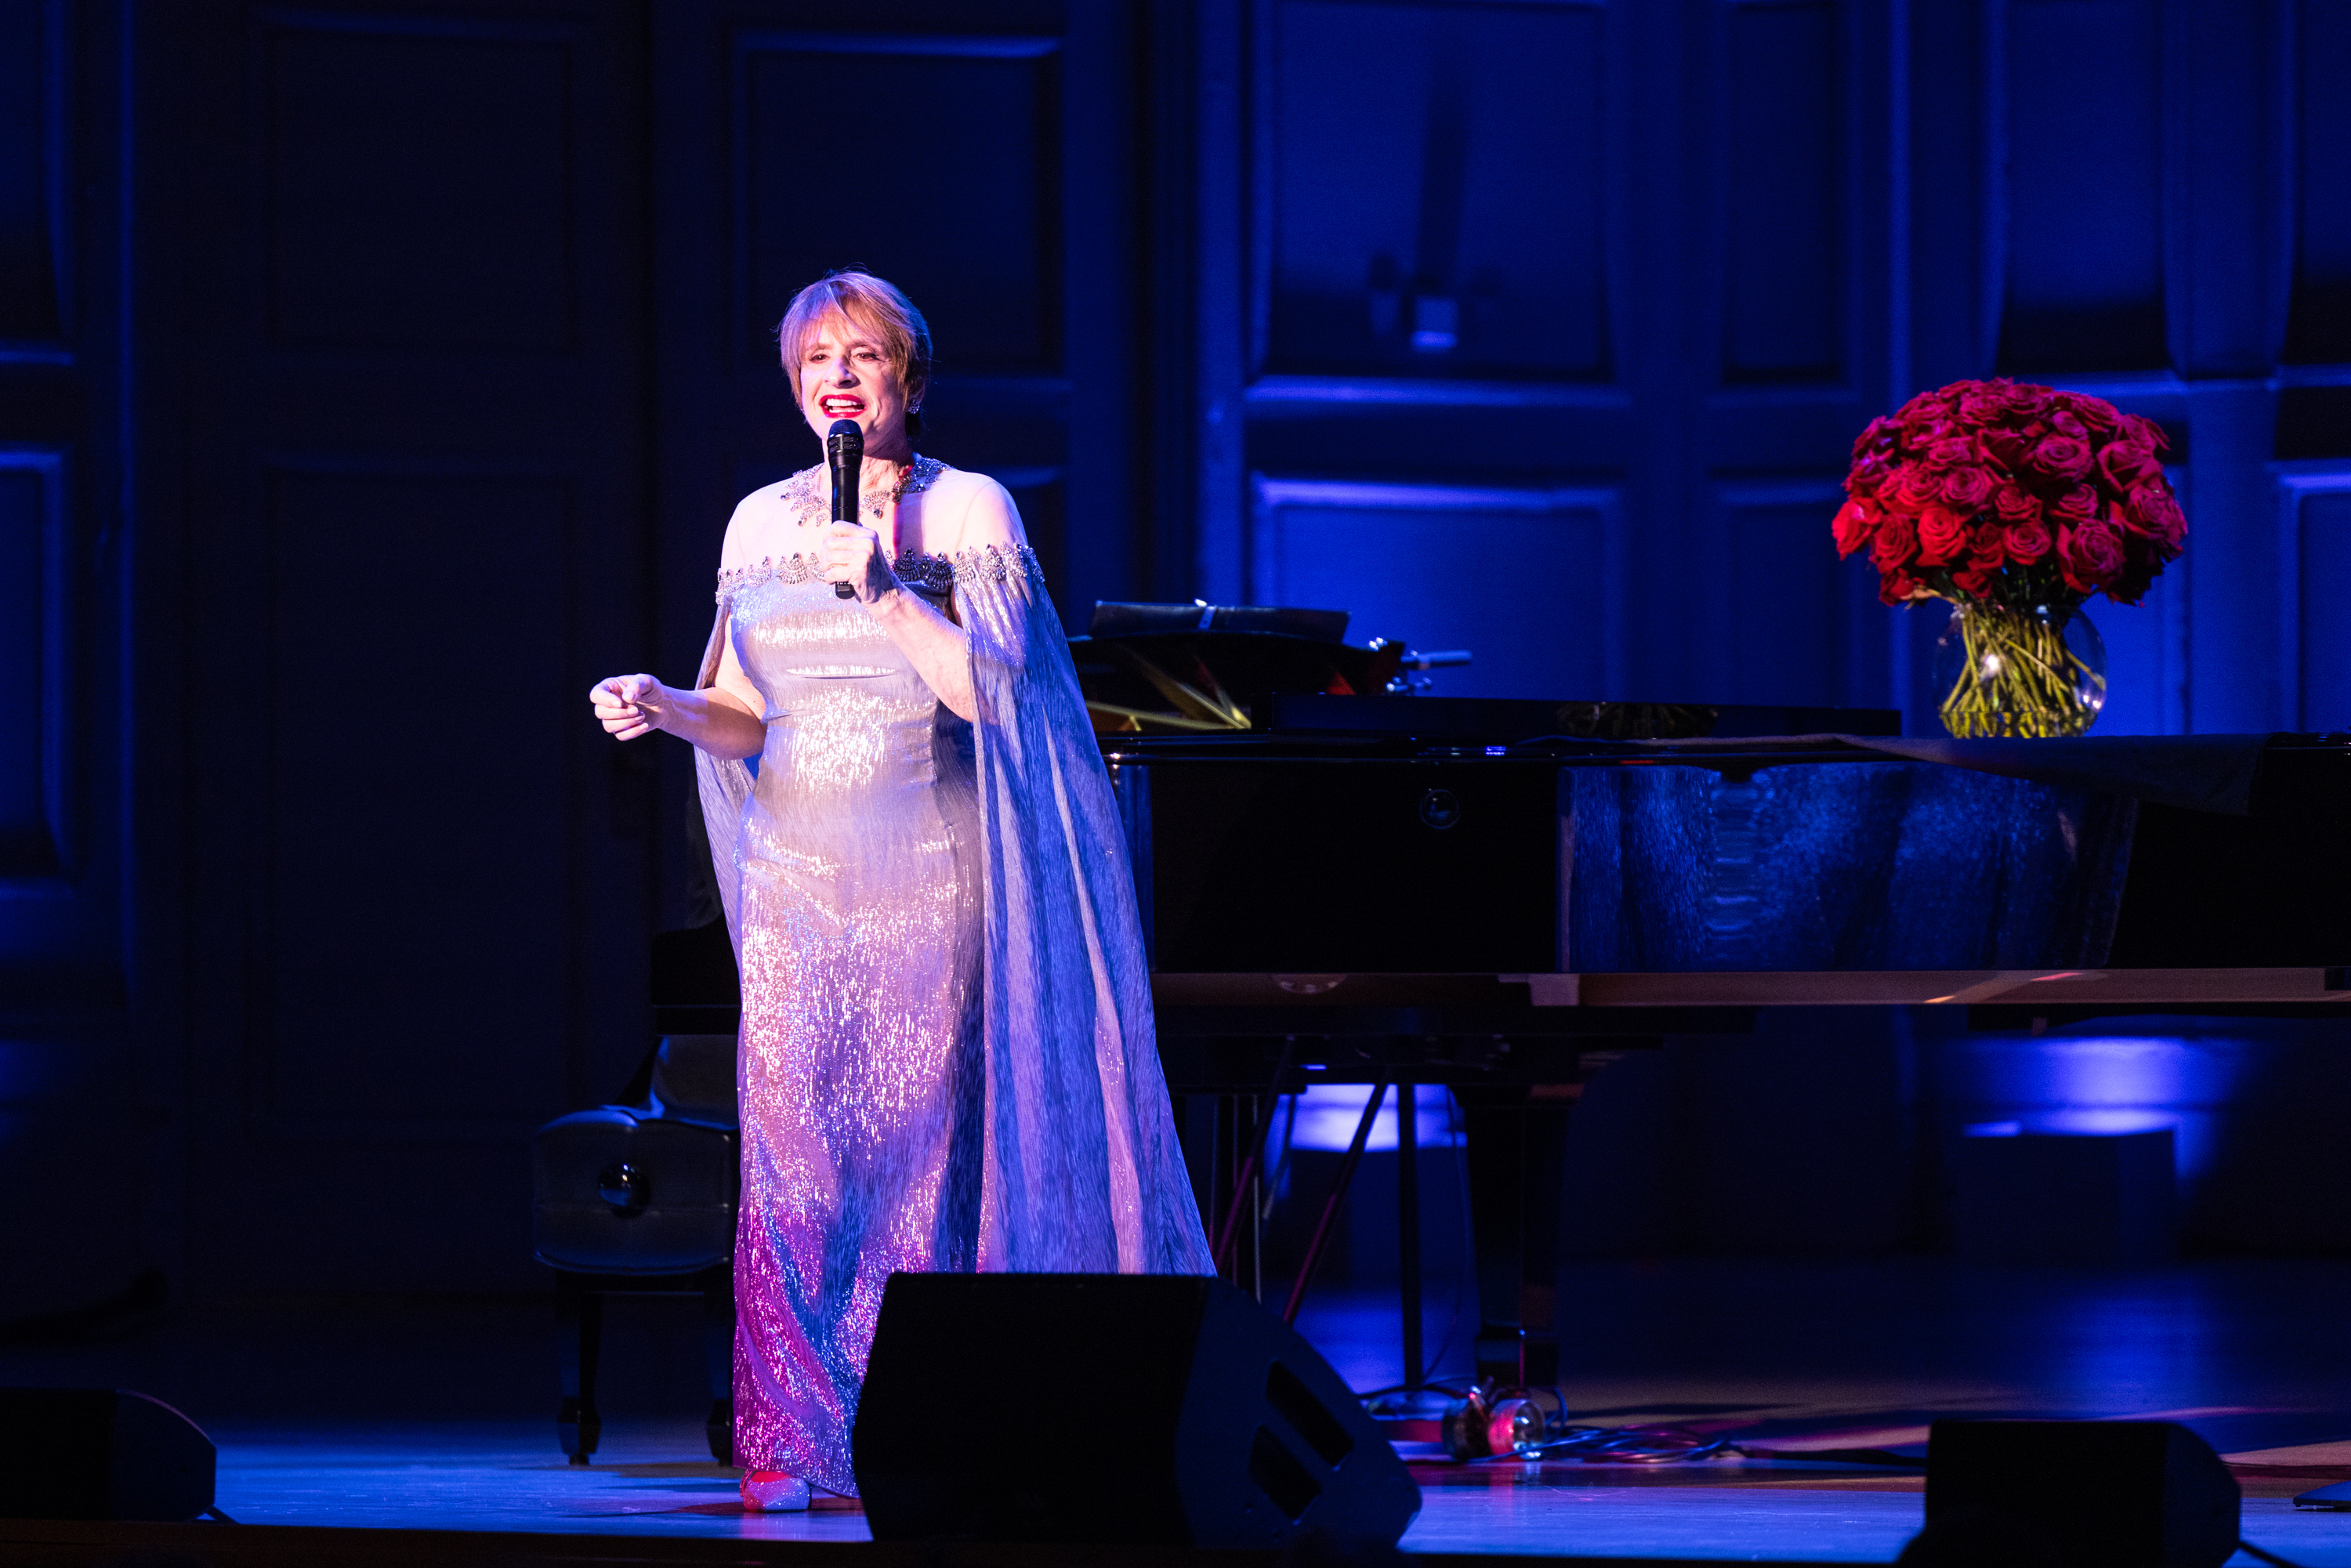 Patti LuPone performs on stage in gown